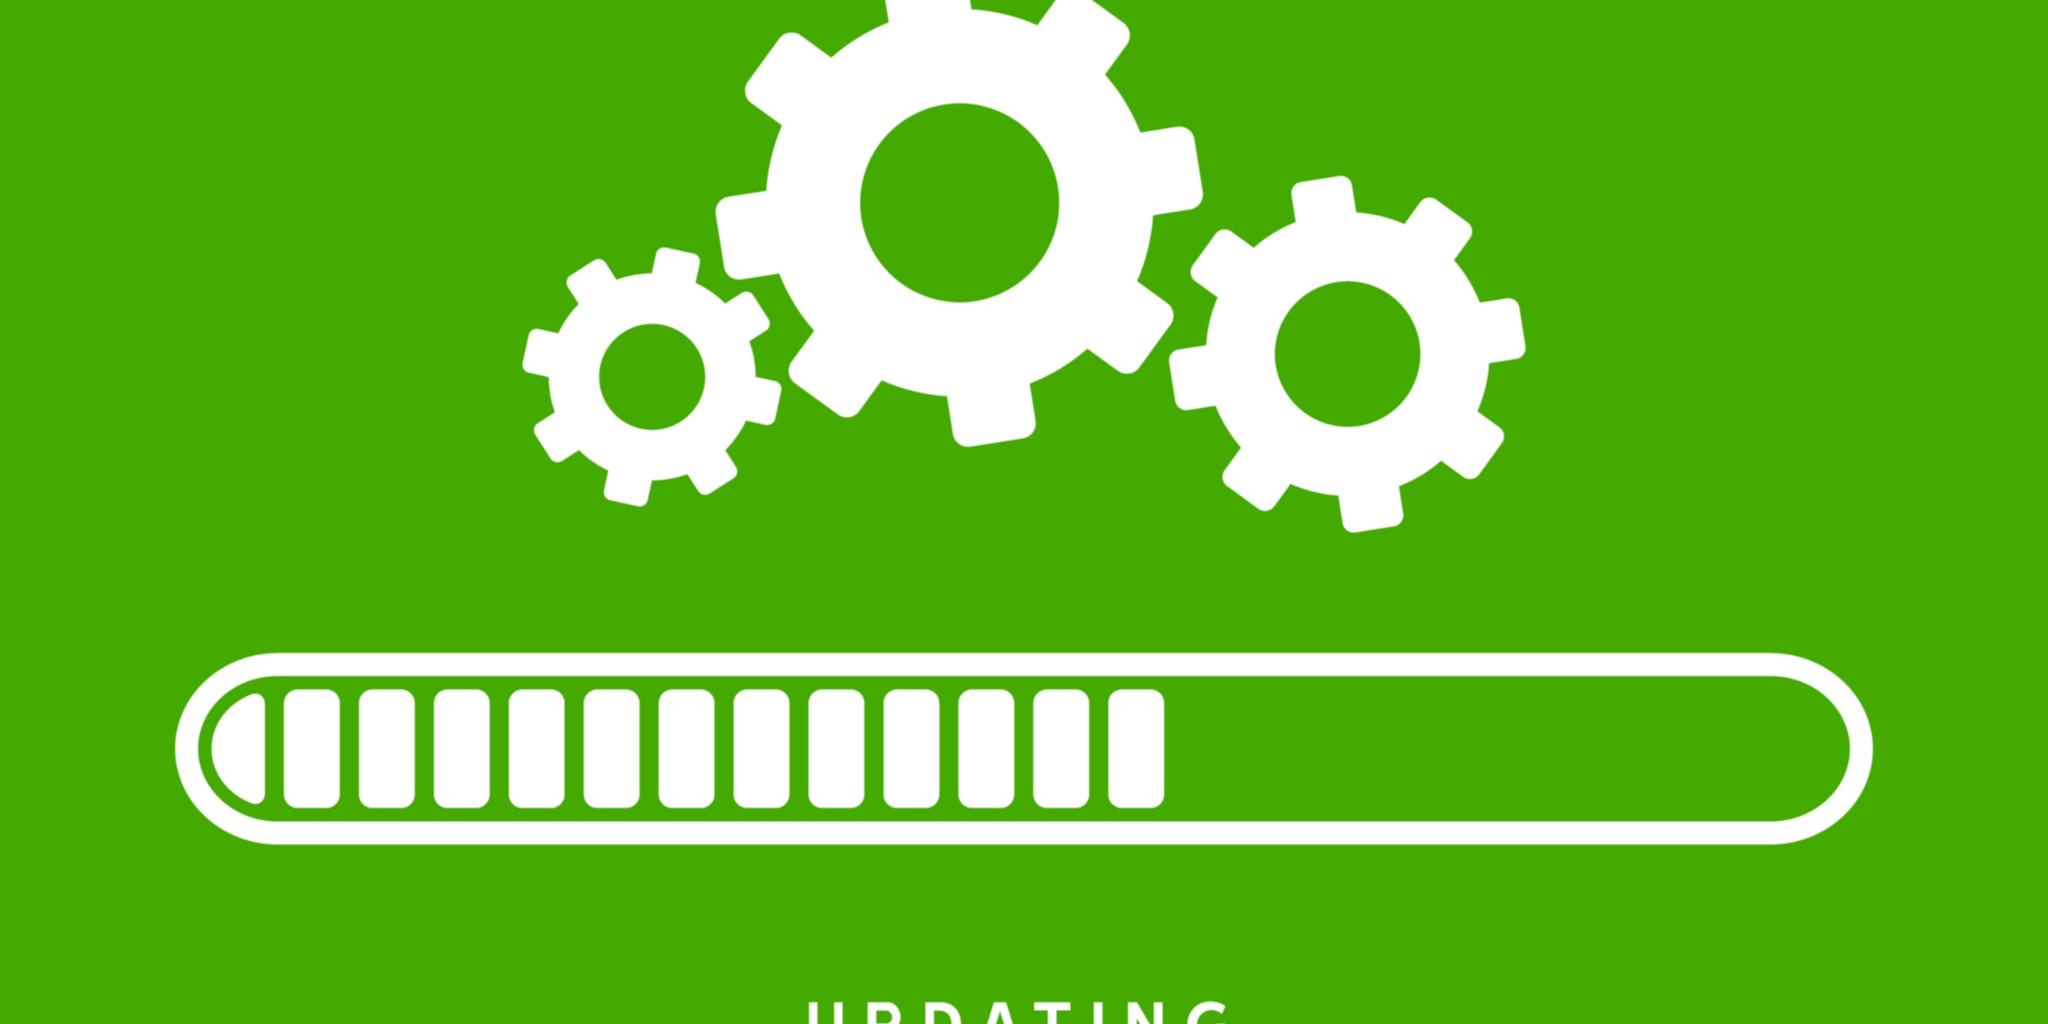 System software update or upgrade. Application loading process symbol web screen. Vector computer technology